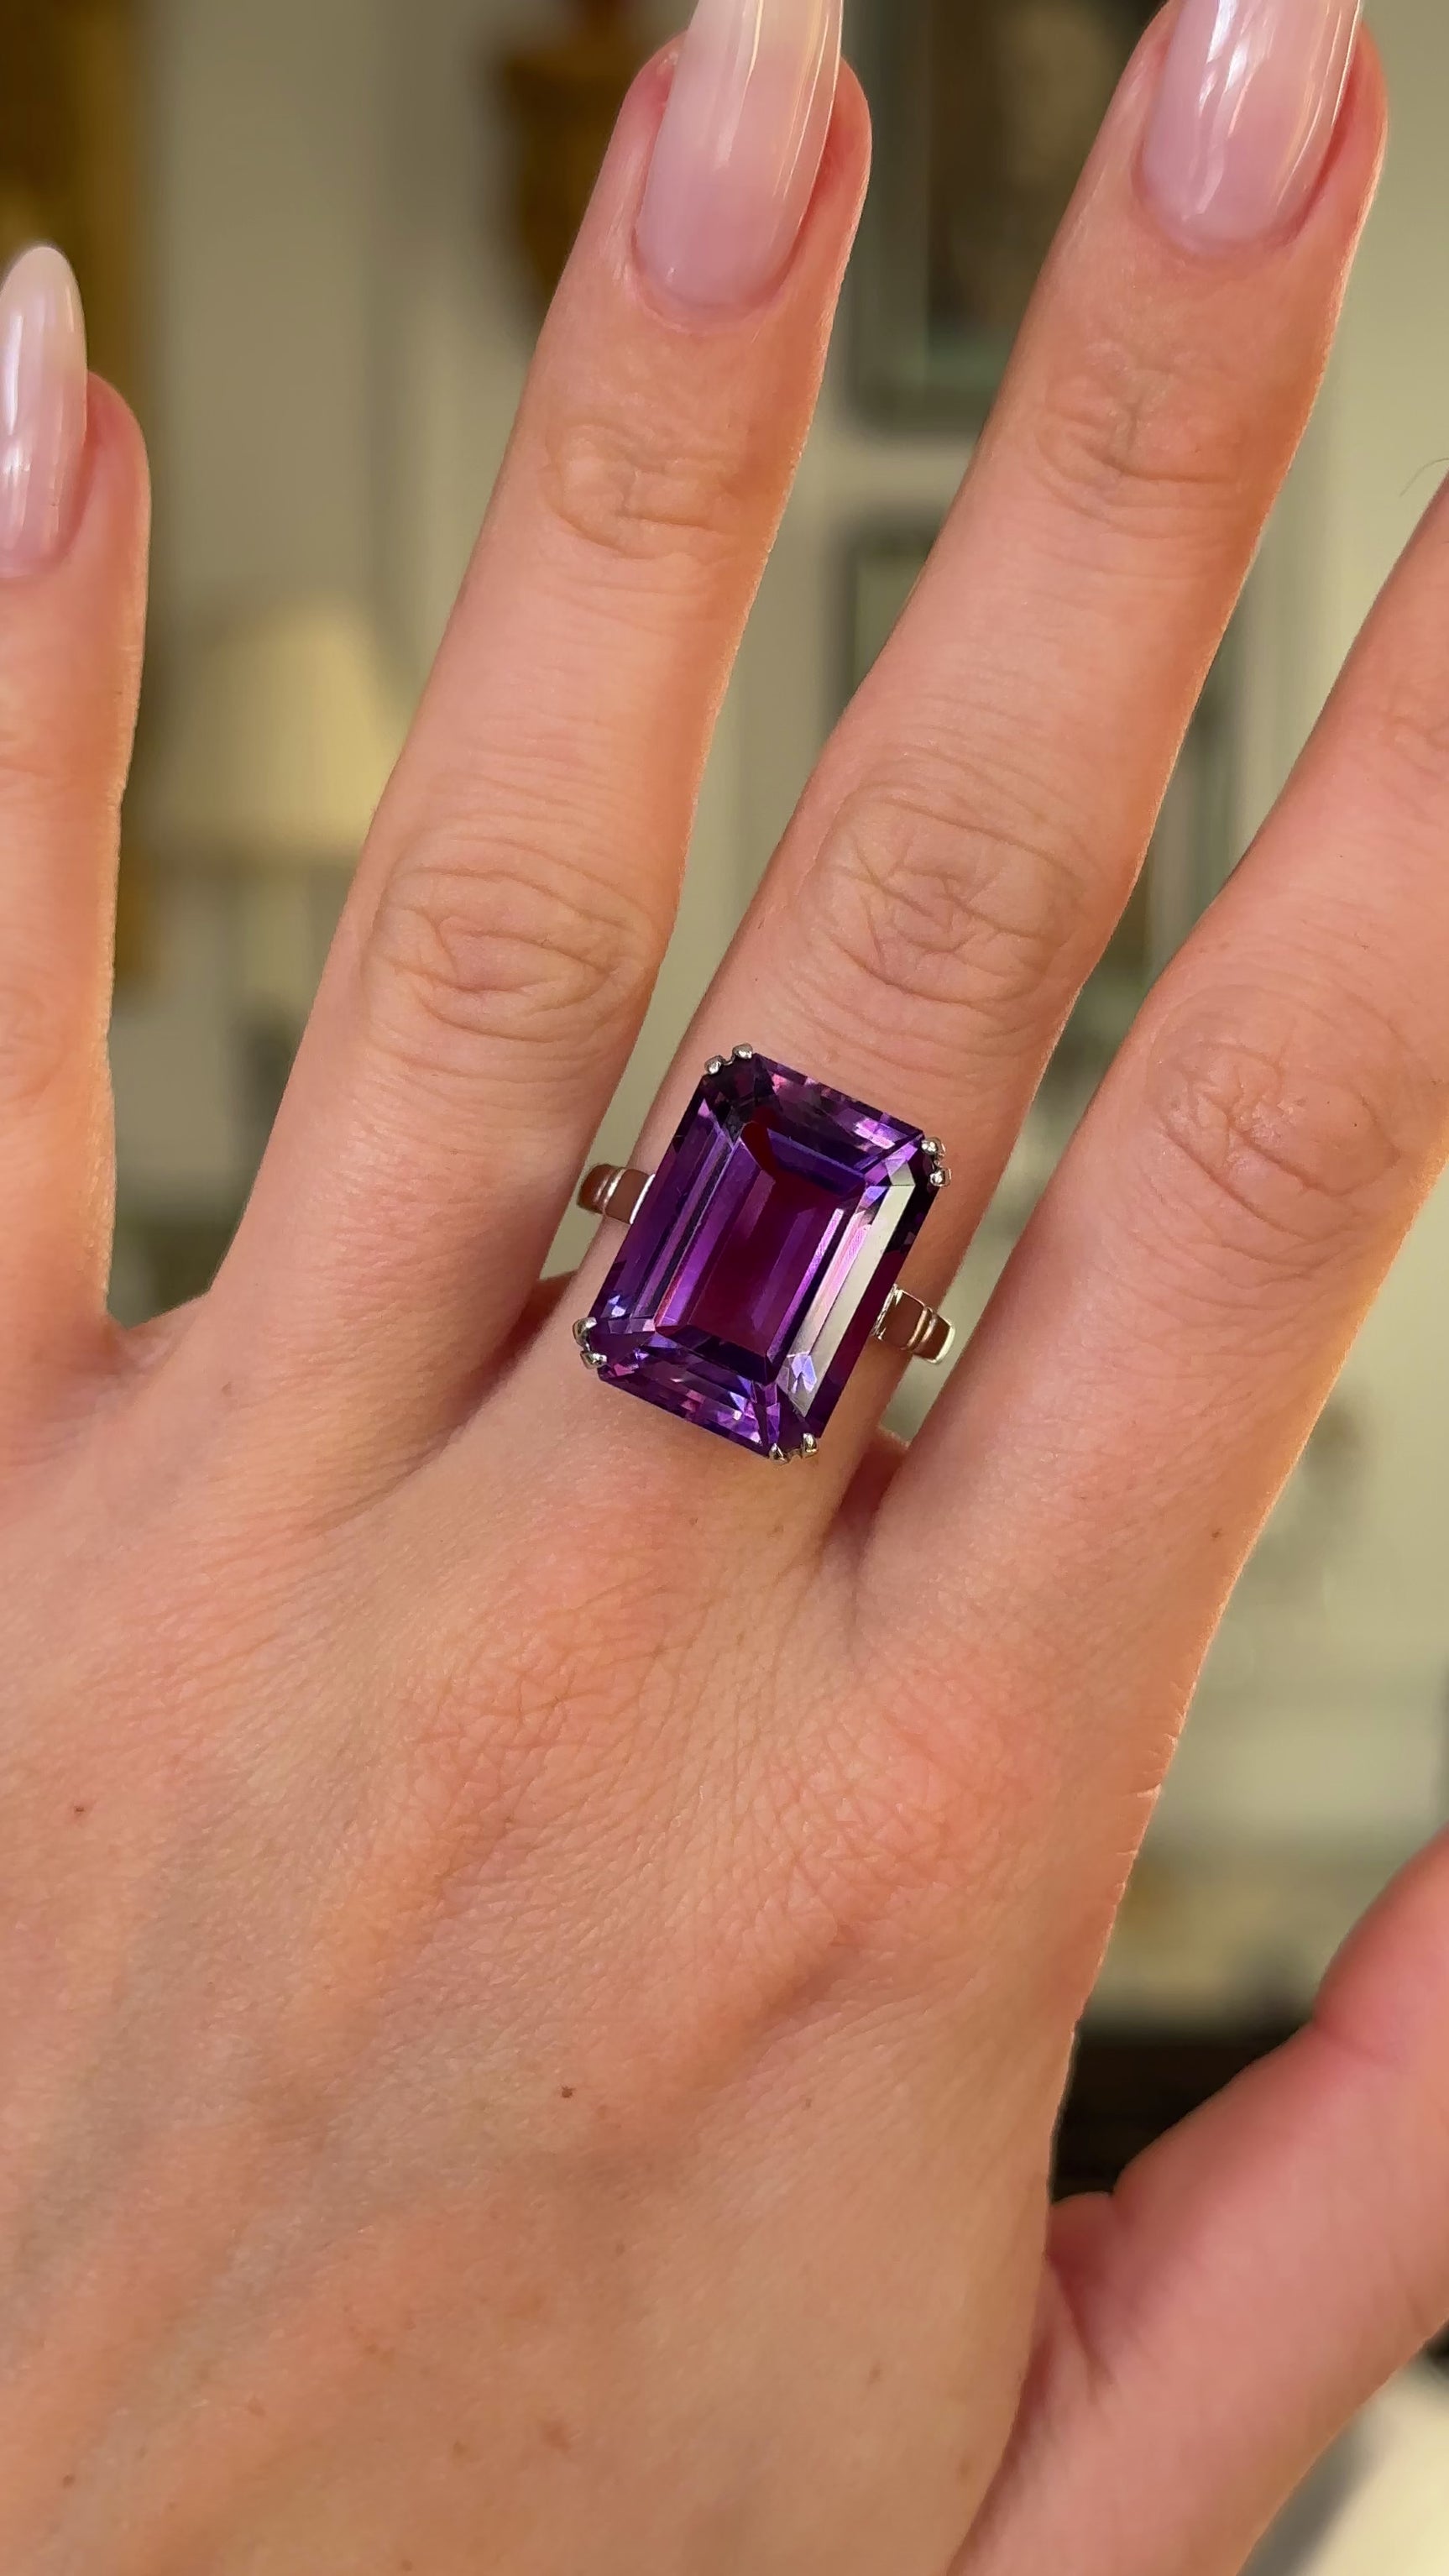 Vintage, Art Deco amethyst cocktail ring worn on hand and moved around to give perspective.